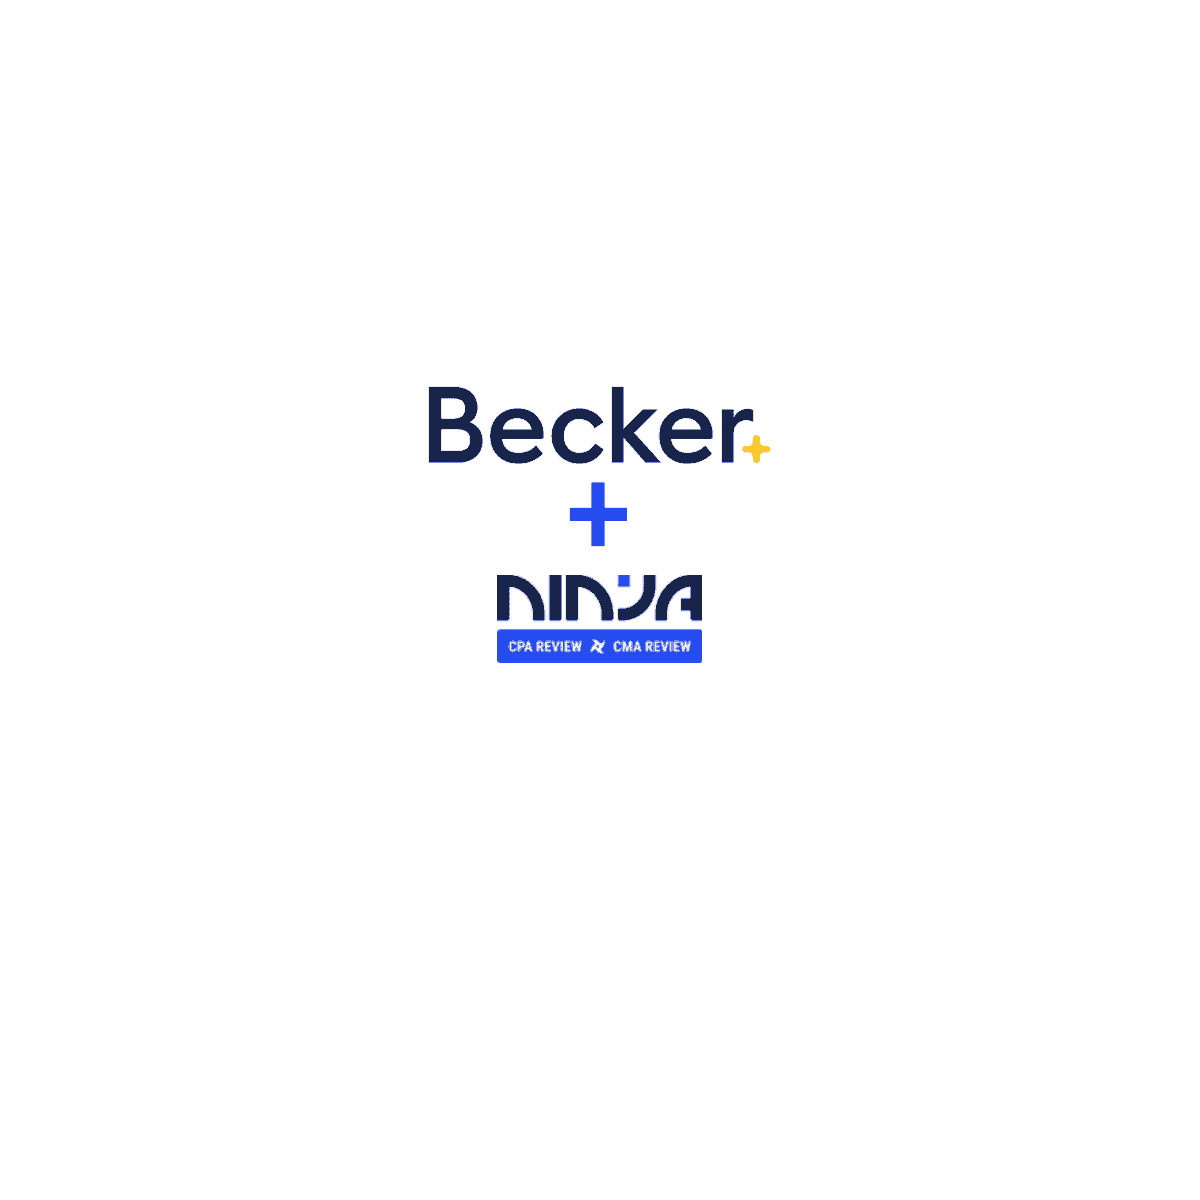 becker cpa review